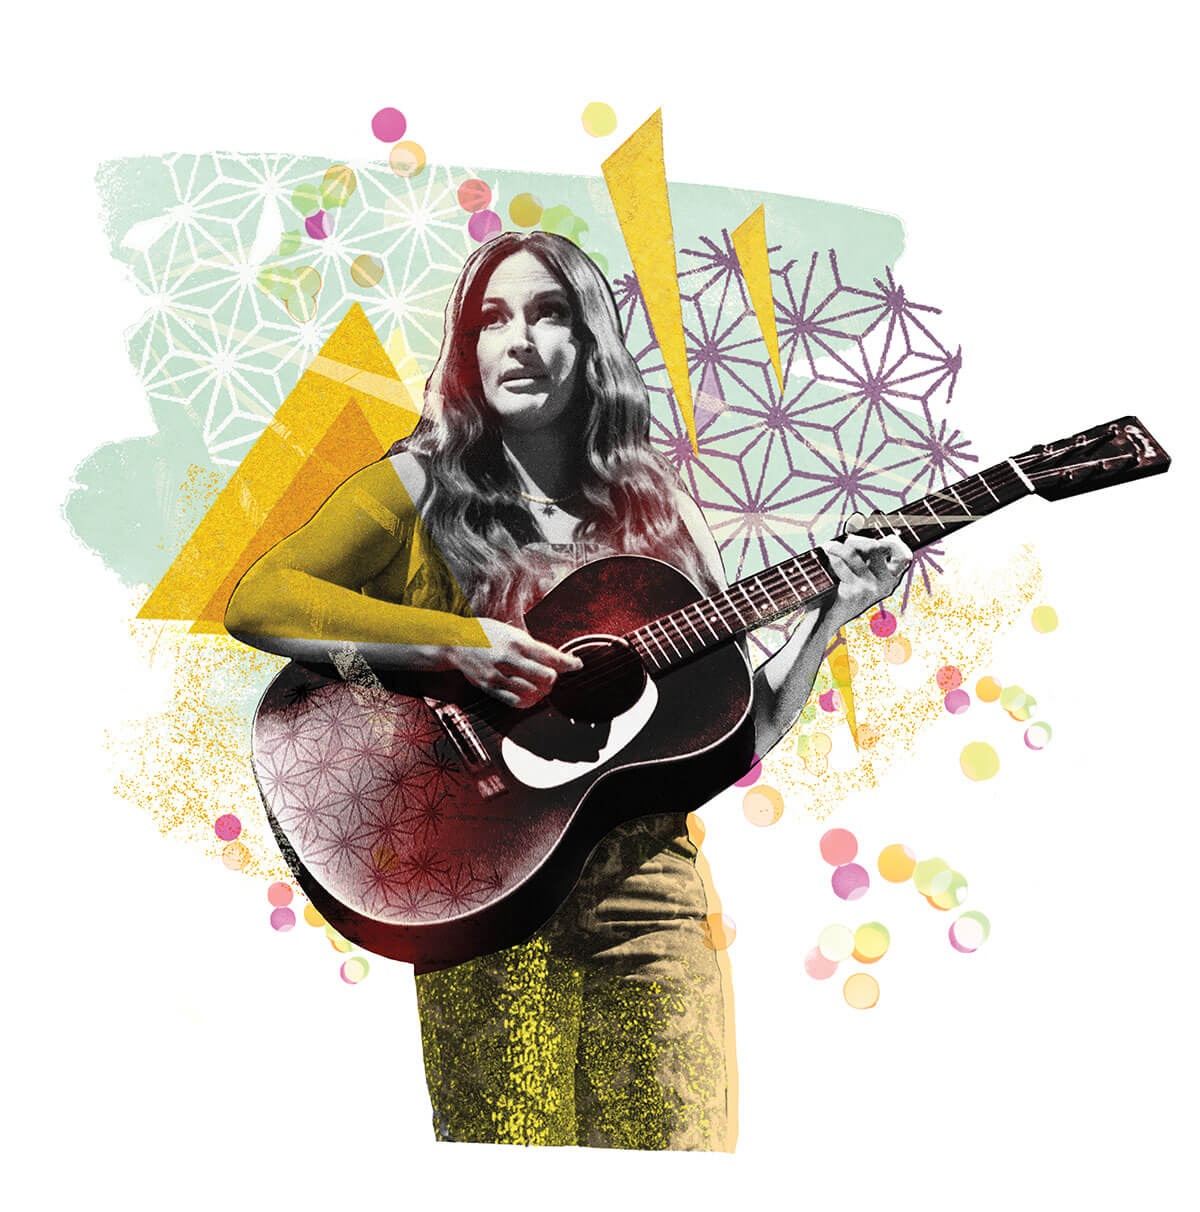 An illustration of a woman with long dark hair holding a guitar in front of a colorful background